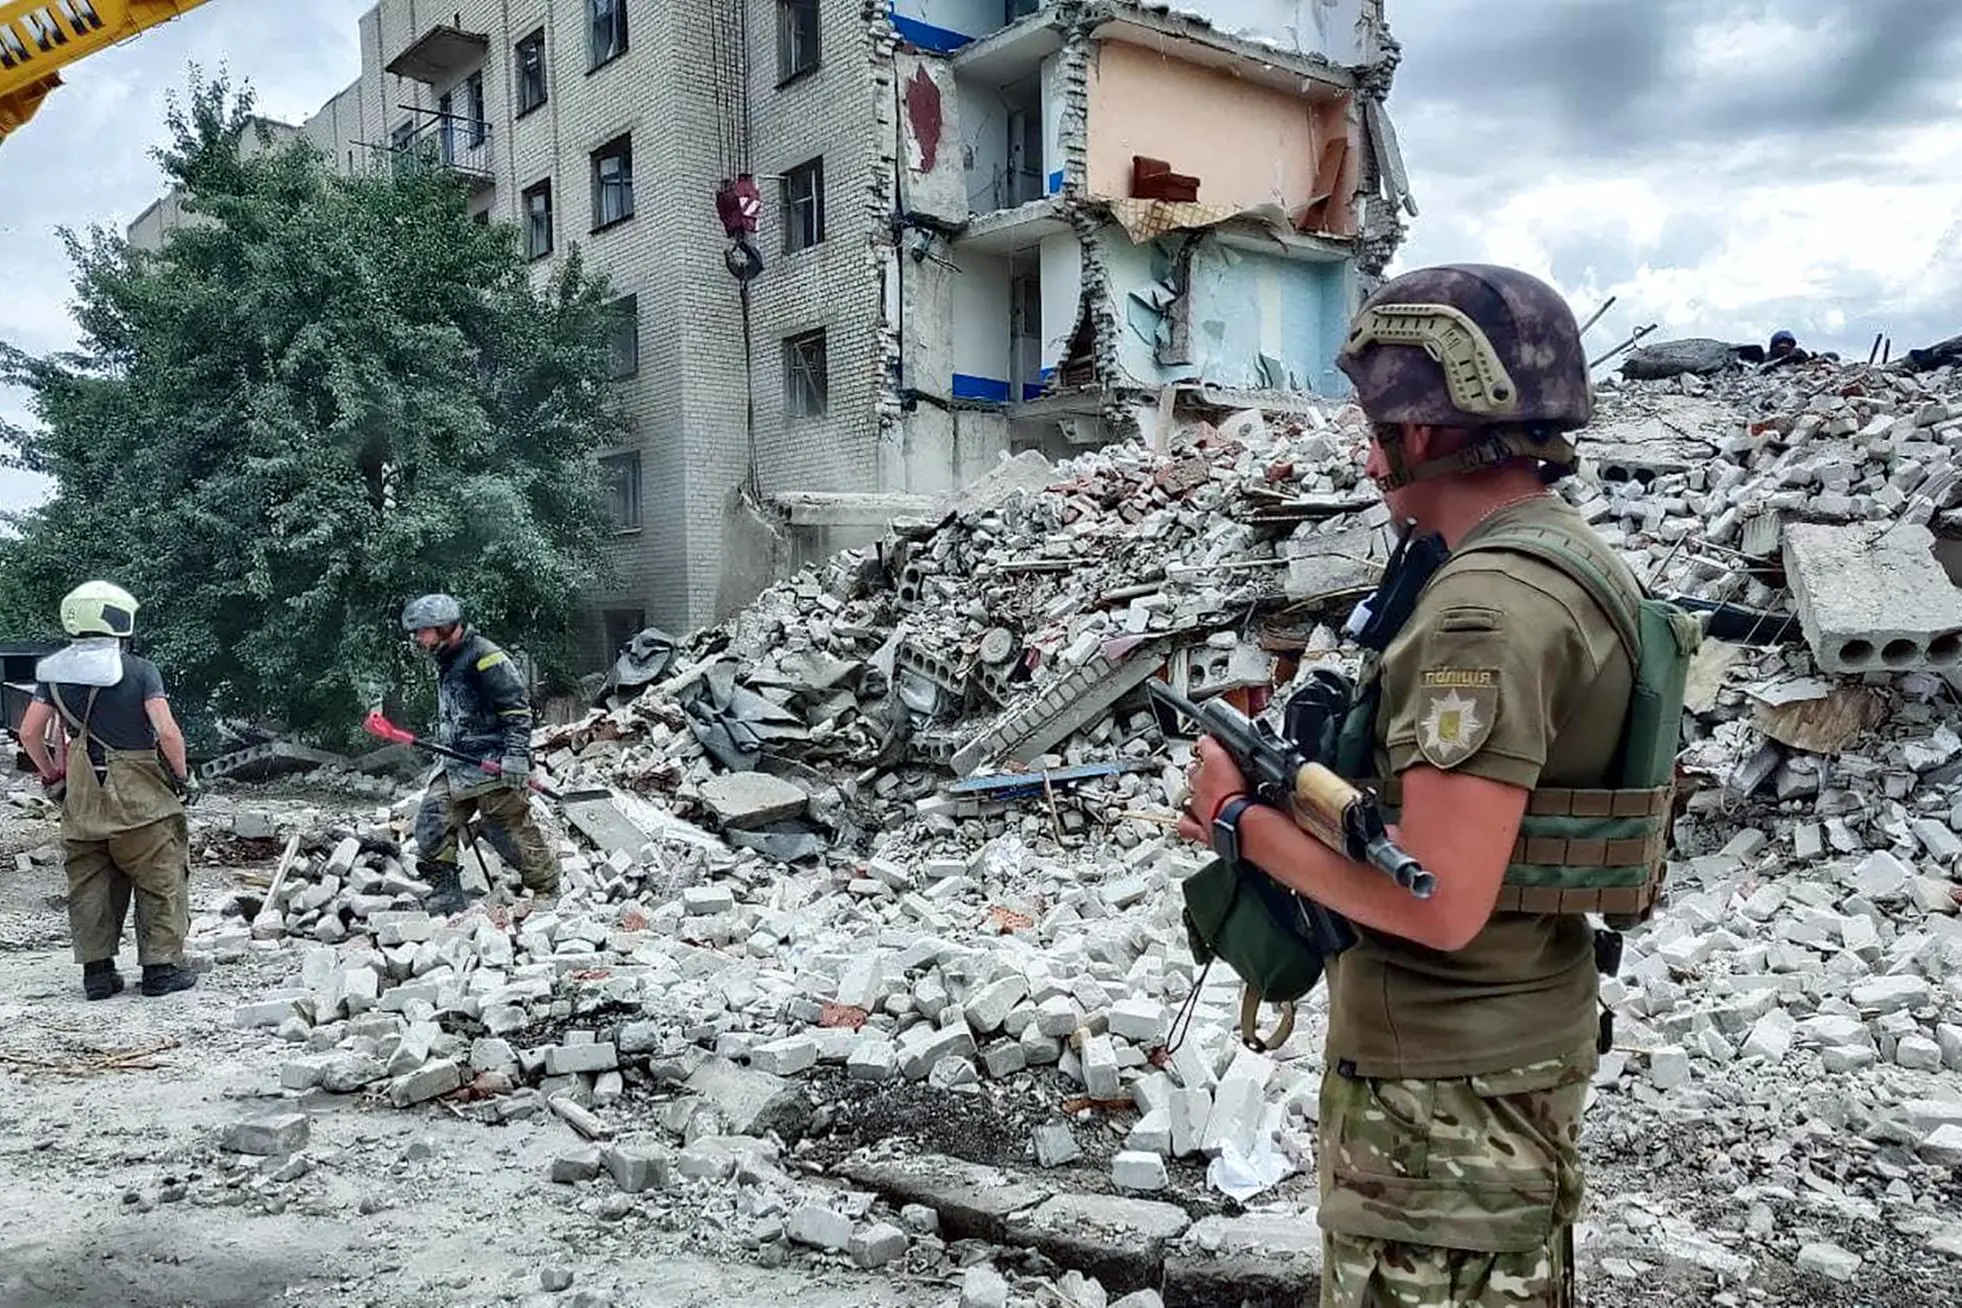 A handout photo made available by the National police press service on 10 July 2022 shows Ukrainian rescuers clean the debris of a residential building after shelling in Chasiv Yar, Ukraine, 10 July 2022. At least 15 people were killed and five injured as a result of the Russian rocket fire on 09 July, the State Emergency Services said. Russian troops on 24 February entered Ukrainian territory, starting a conflict that has provoked destruction and a humanitarian crisis. ANSA/National police press service / HANDOUT HANDOUT EDITORIAL USE ONLY/NO SALES